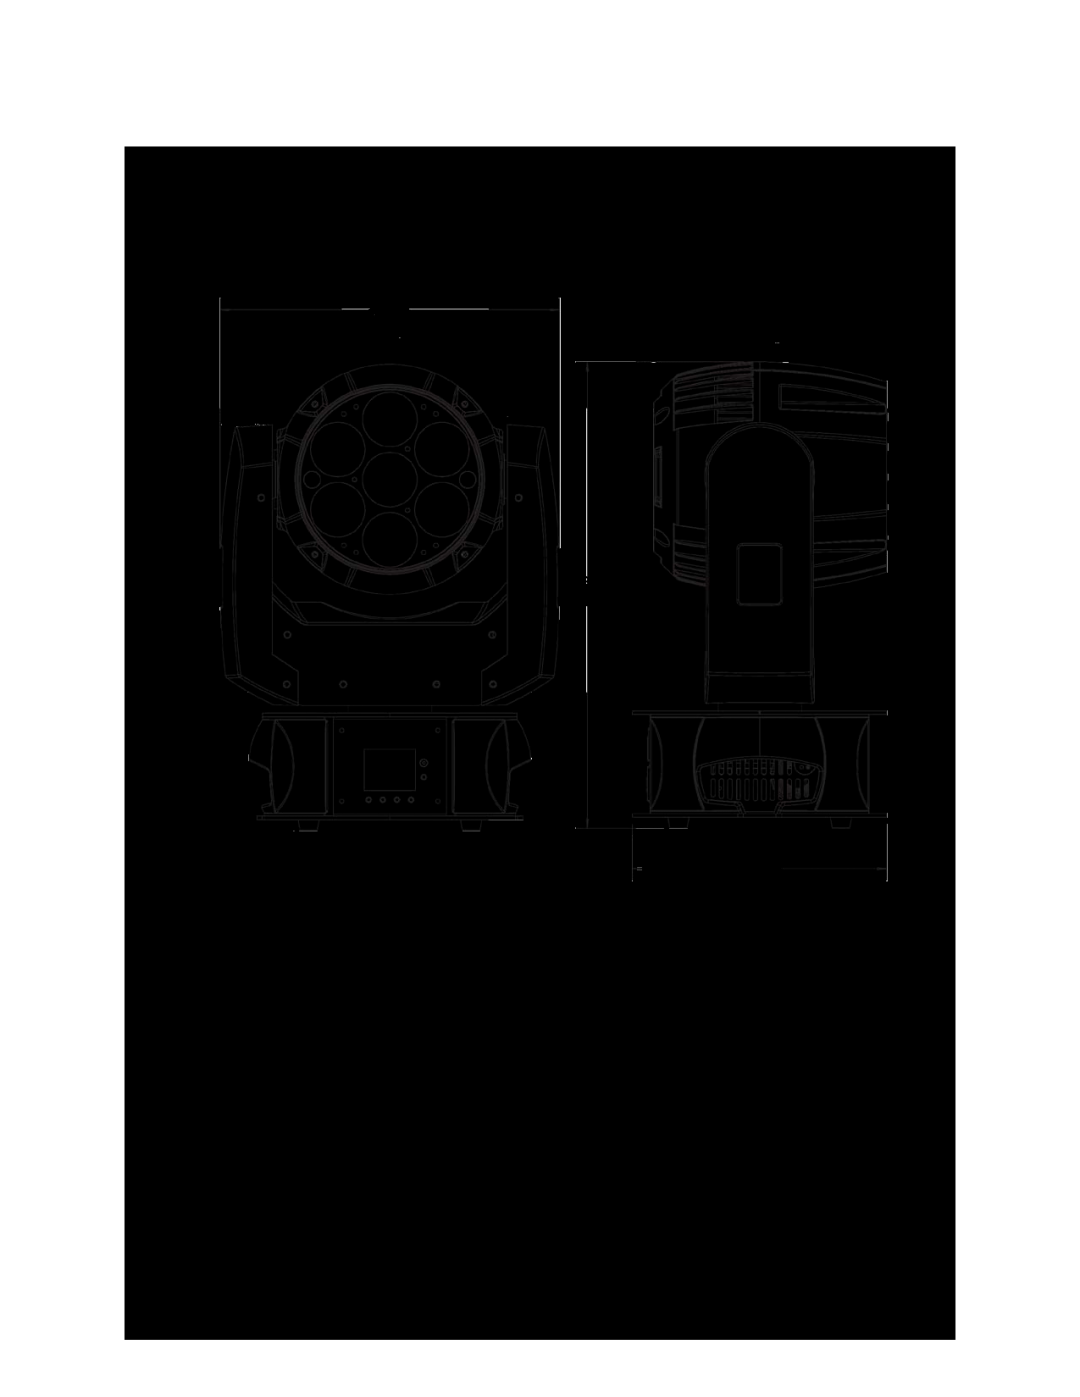 Chauvet 250irc user manual Dimensions, 9.4 in 240 mm 13 in 330 mm 7.1 in 180 mm 